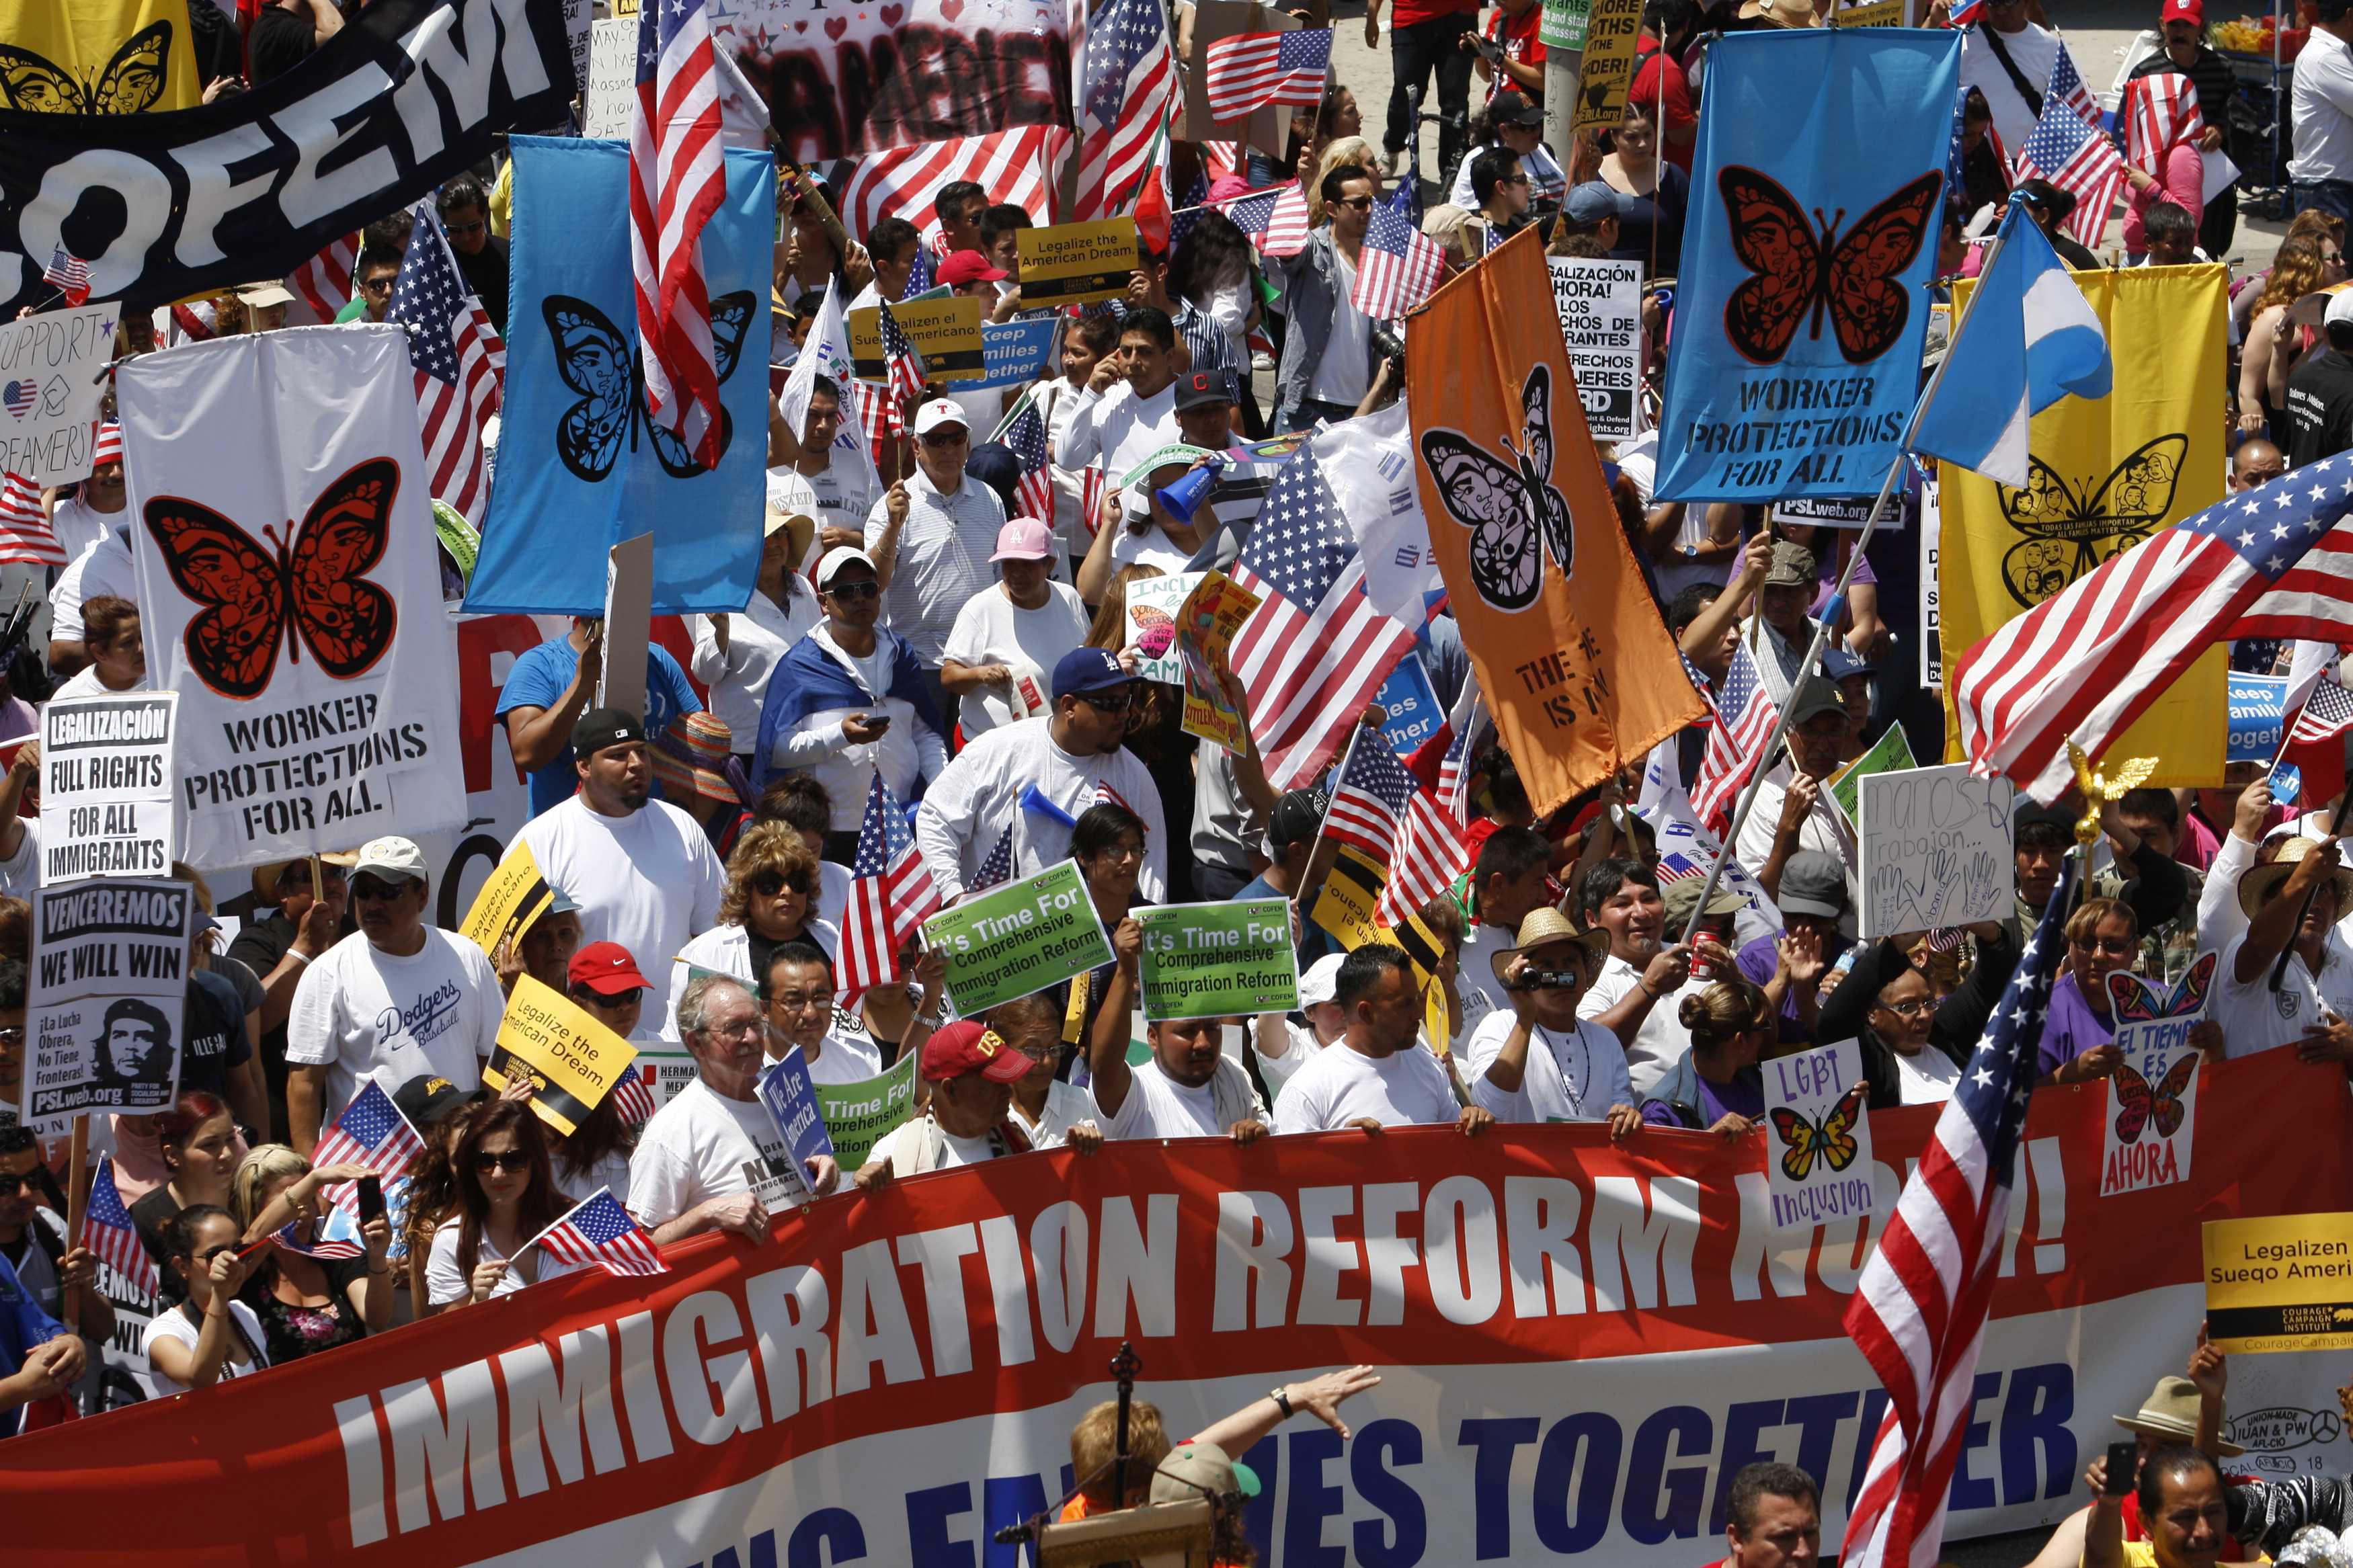 Immigrants Aren’t Taking Americans’ Jobs, New Study Finds